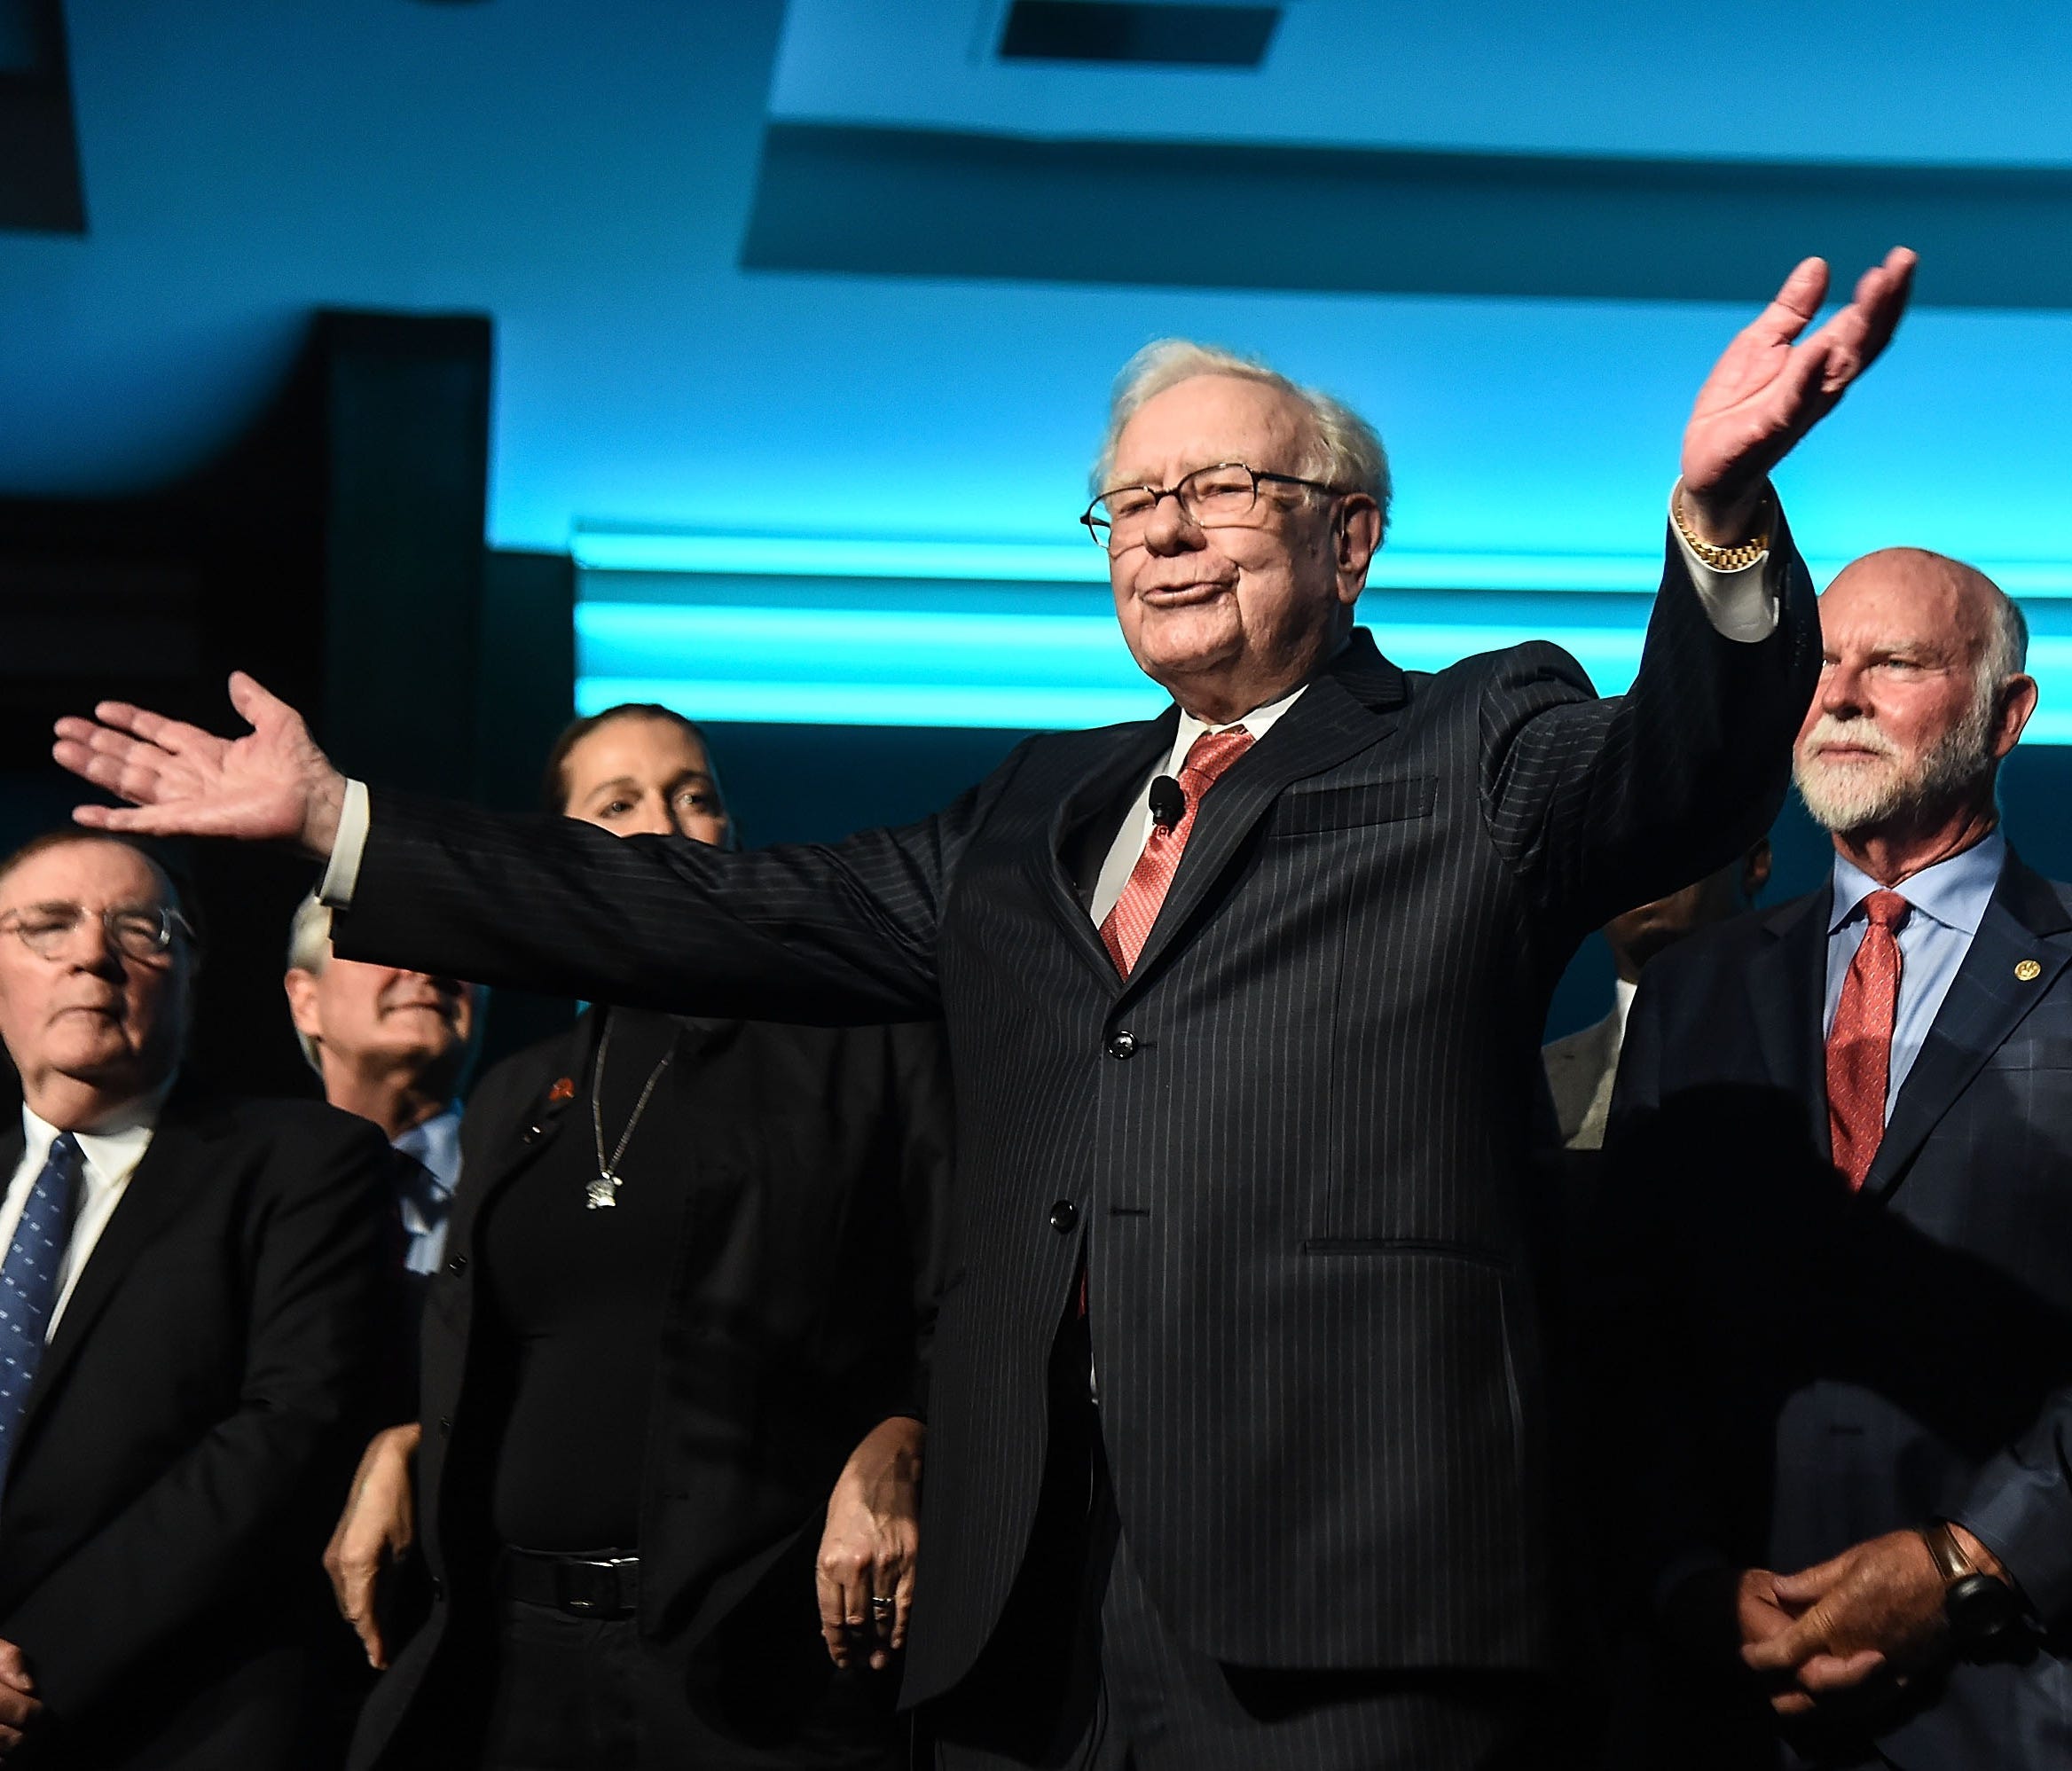 Philanthropist Warren Buffett (C) is joined onstage by 24 other philanthropist and influential business people featured on the Forbes list of 100 Greatest Business Minds during the Forbes Media Centennial Celebration at Pier 60 on September 19, 2017 